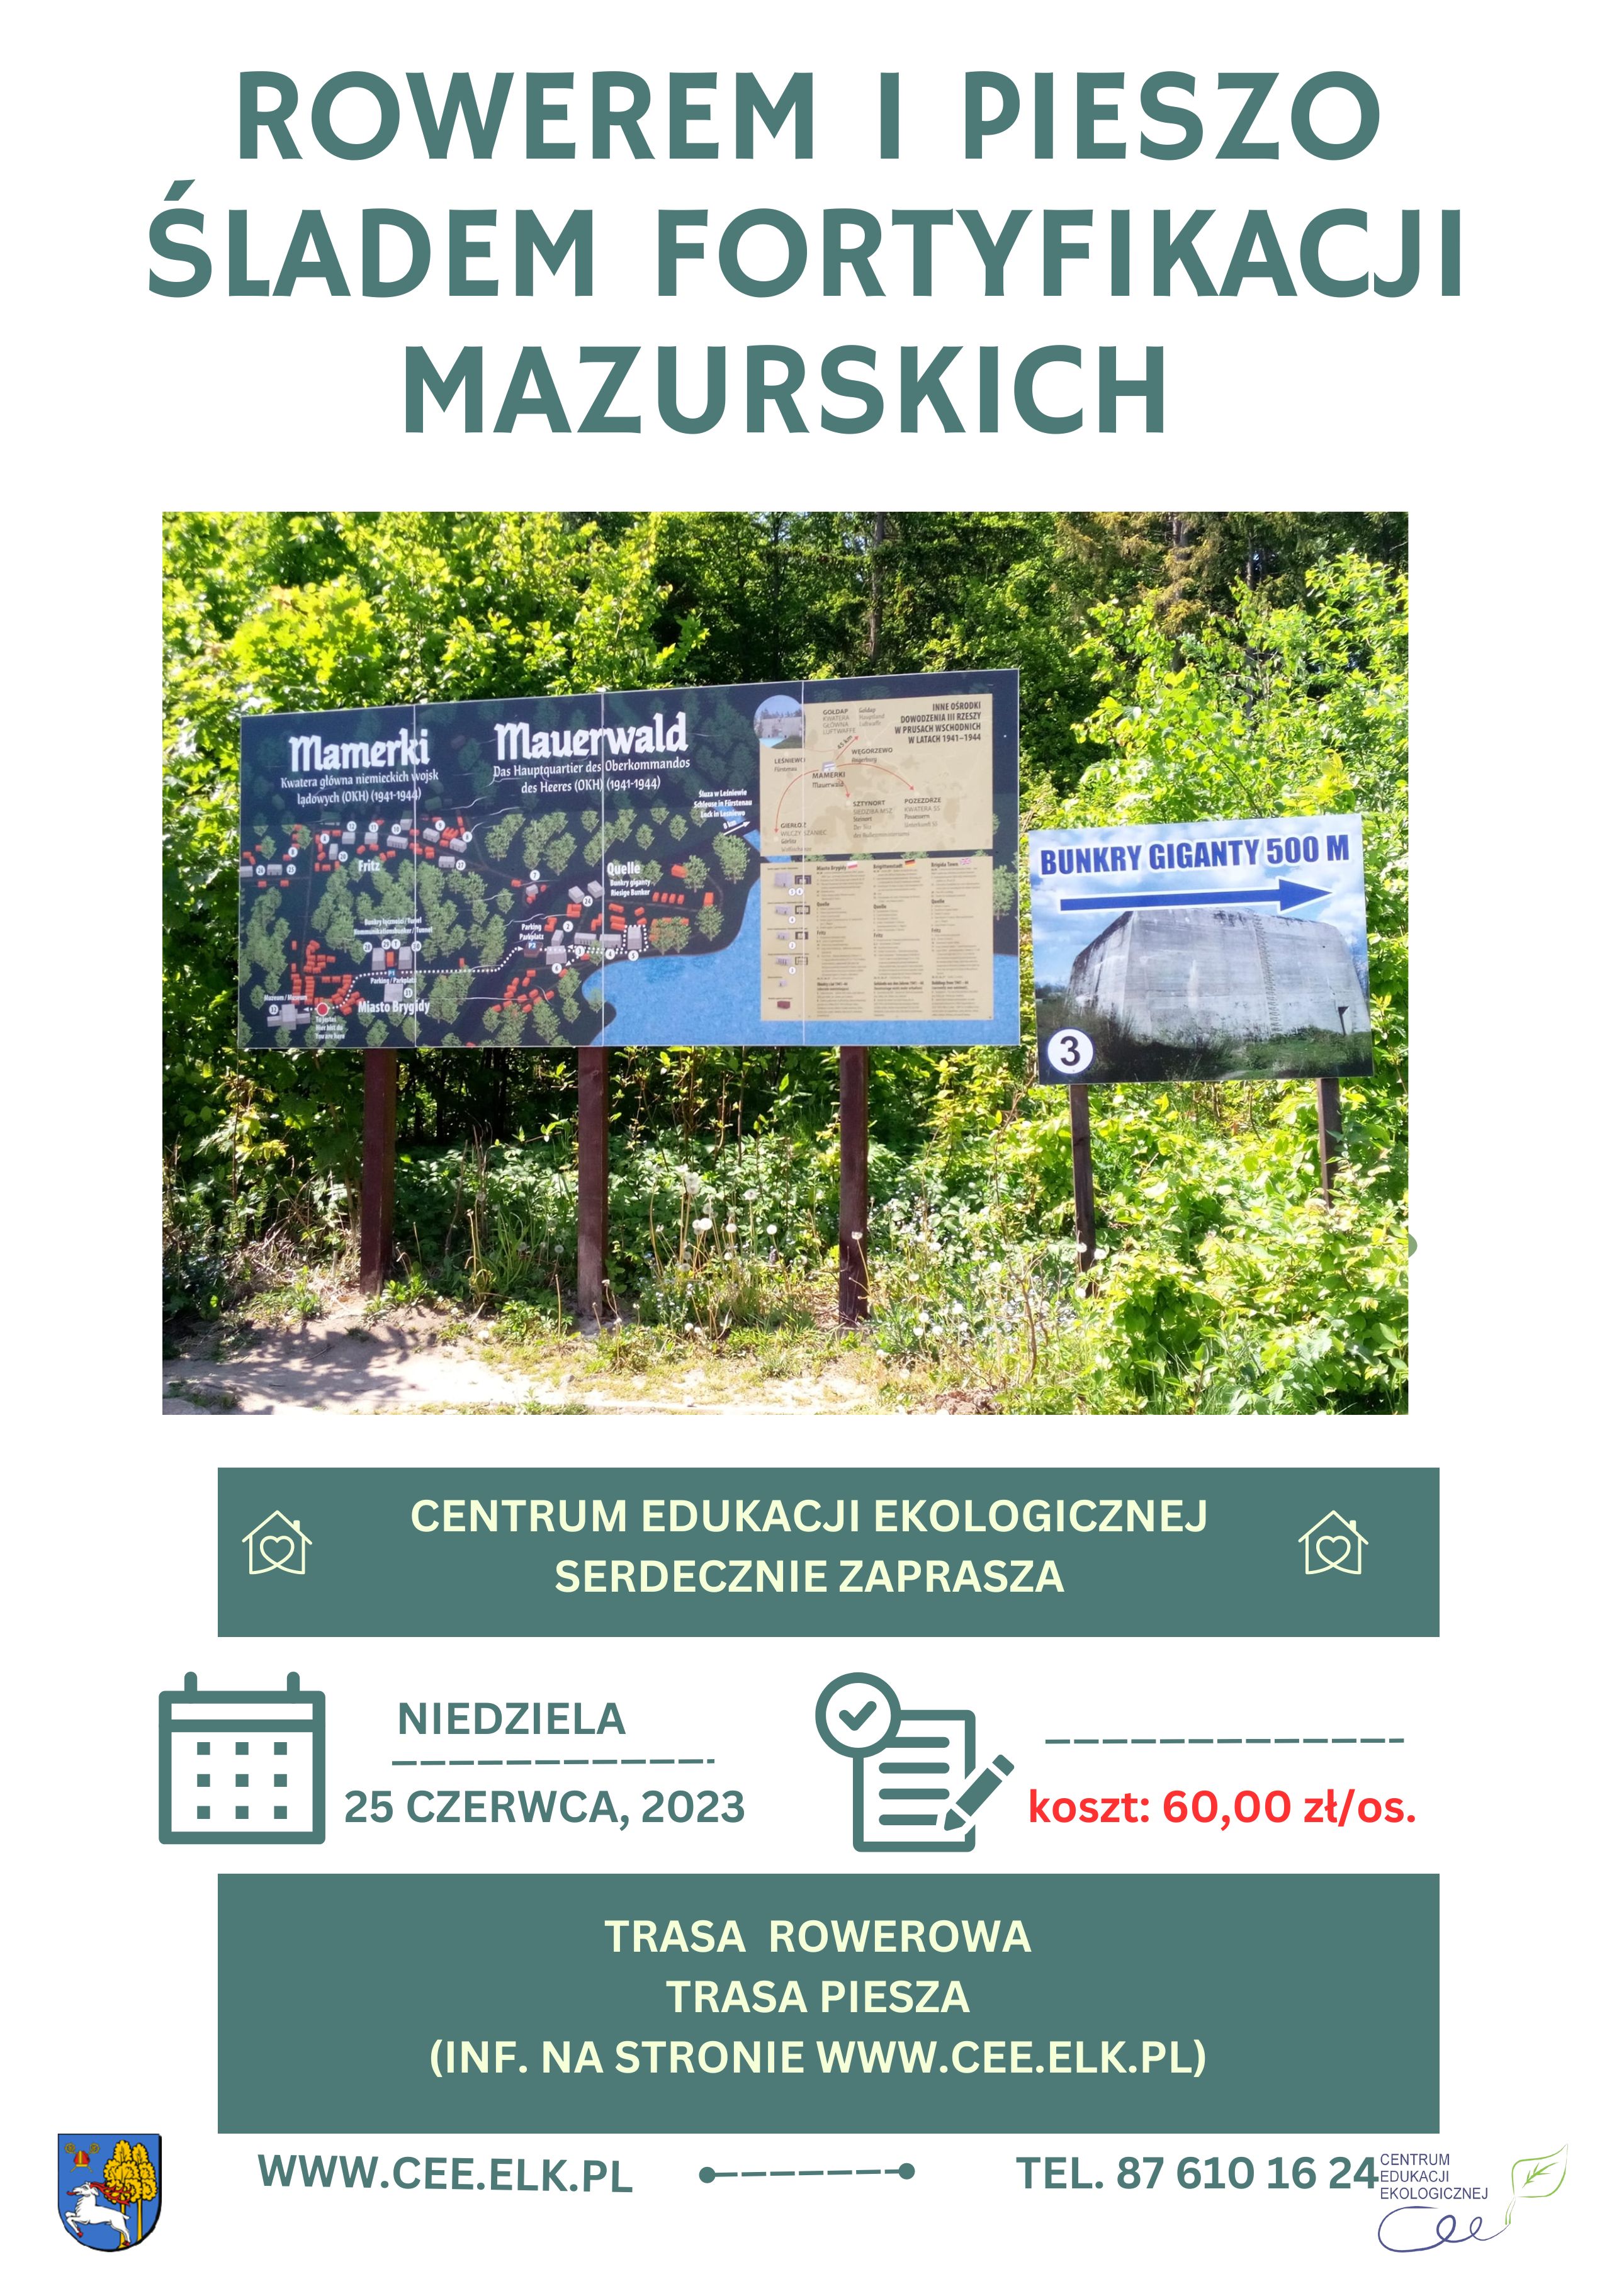 By bike and on foot in the footsteps of the Masurian fortifications